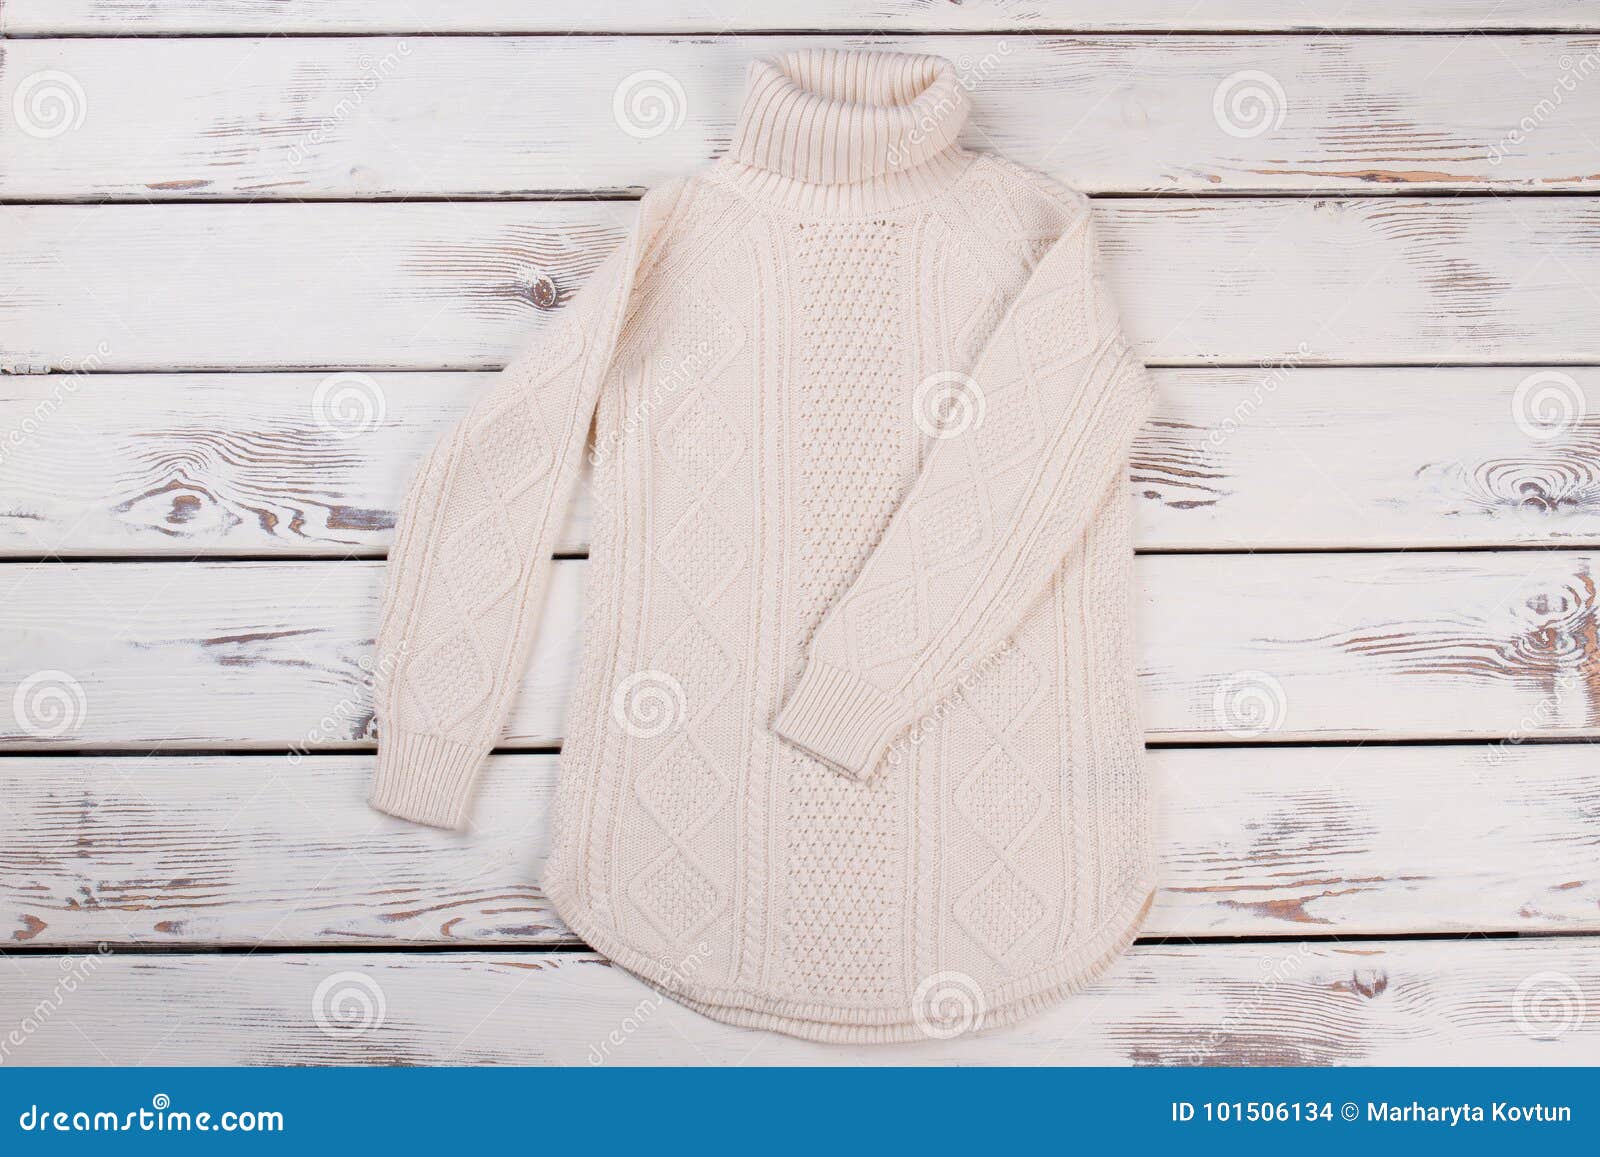 Long white knitted sweater stock photo. Image of autumn - 101506134